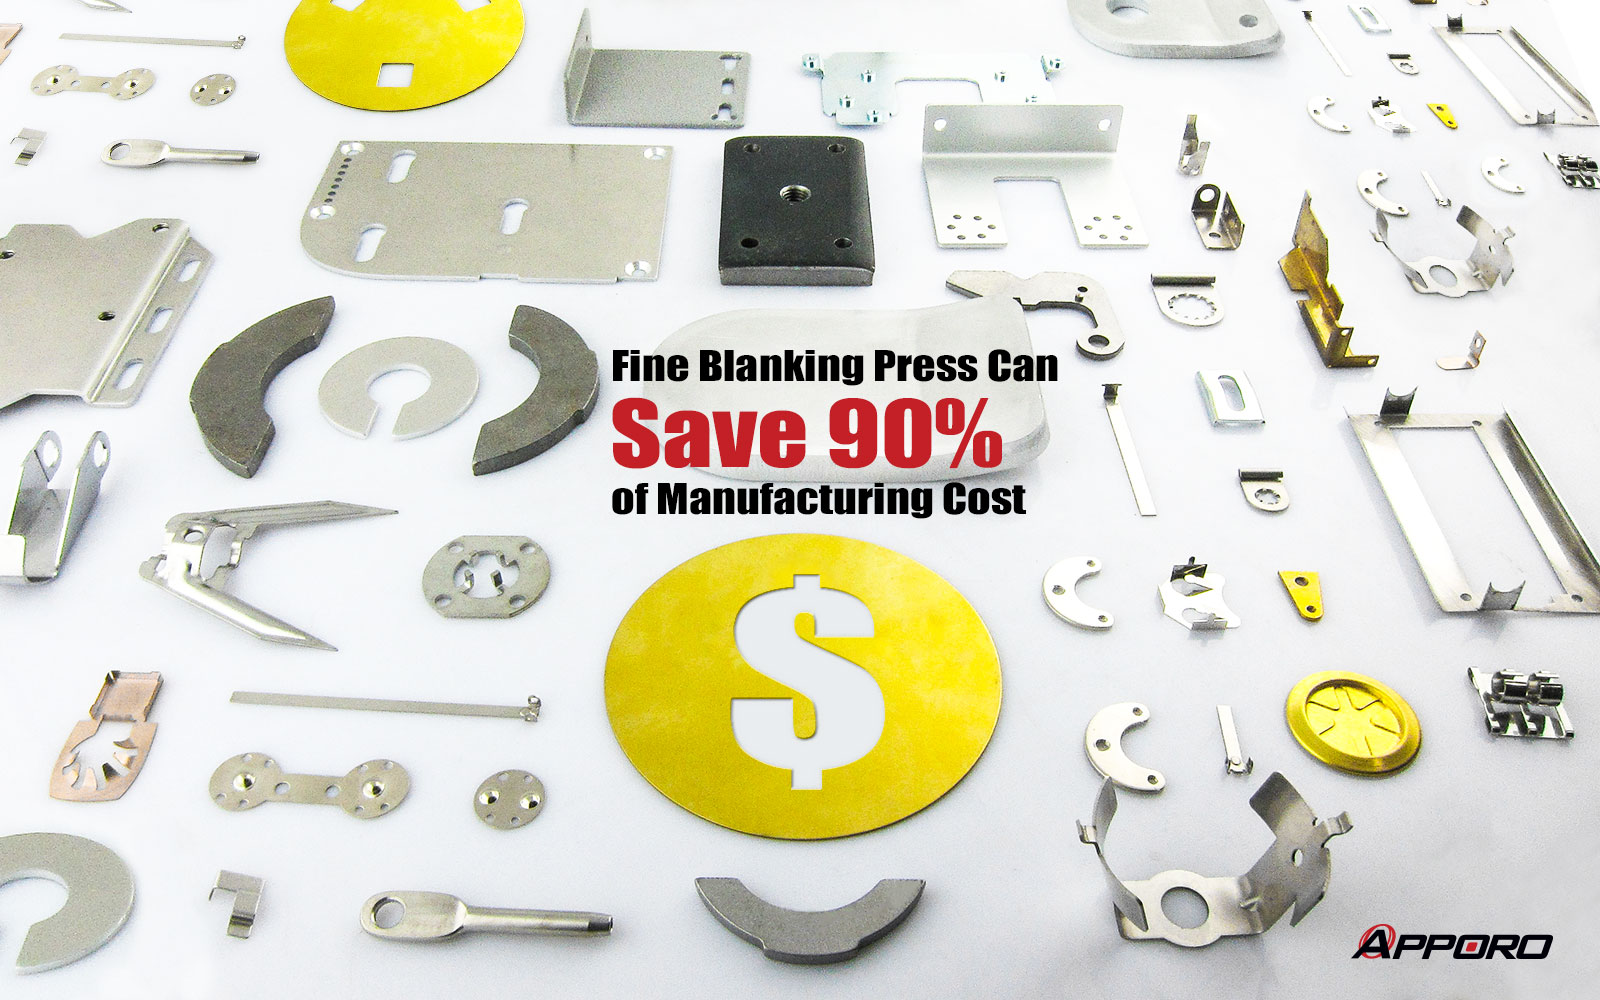 Fine Blanking Press Can Save 90% of Manufacturing Cost